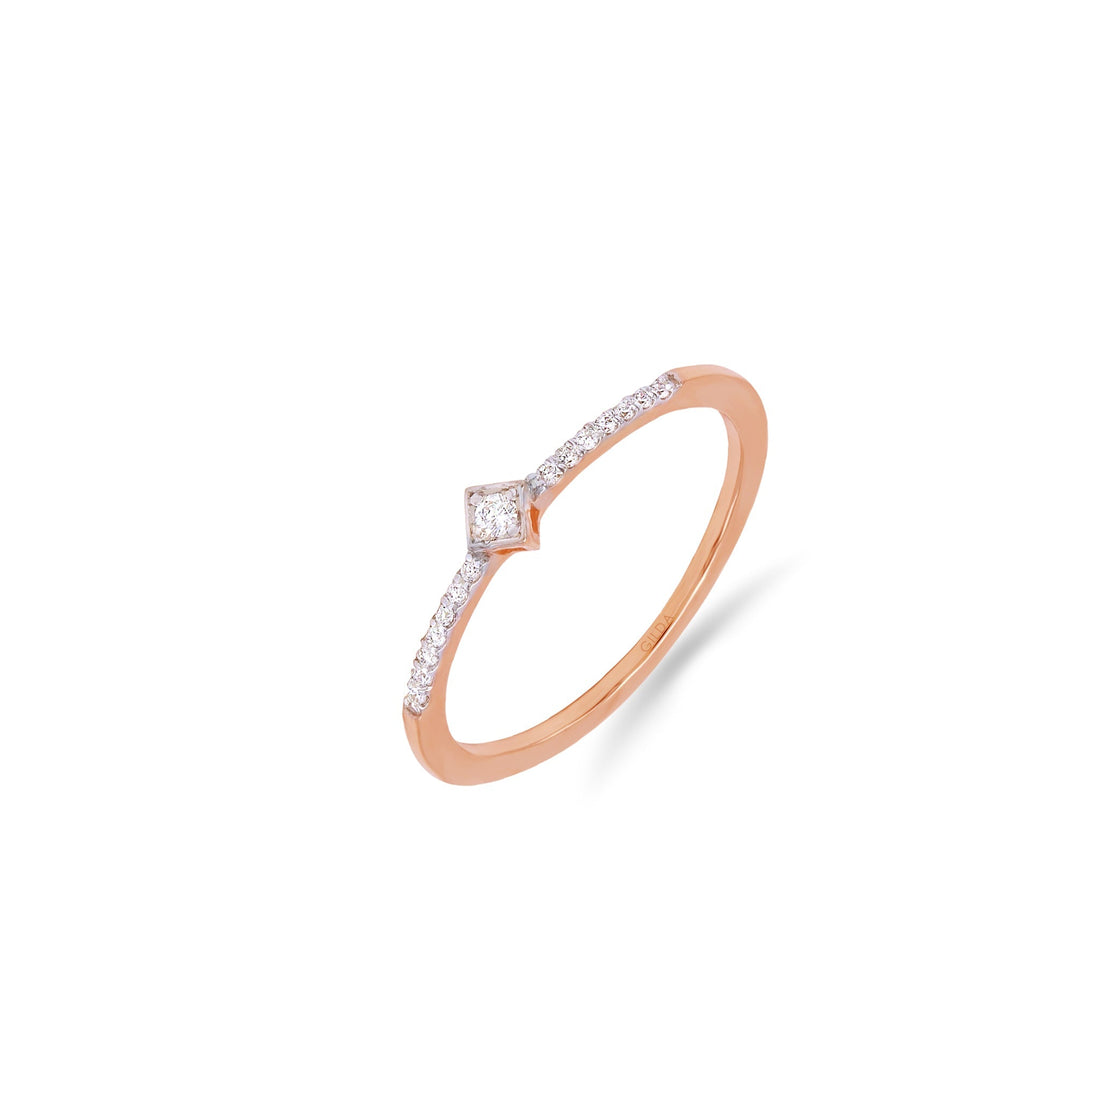 Jewelry Minnies | Diamond Ring | 0.07 Cts. | 14K Gold - Rose / 6 / Diamonds - ring Zengoda Shop online from